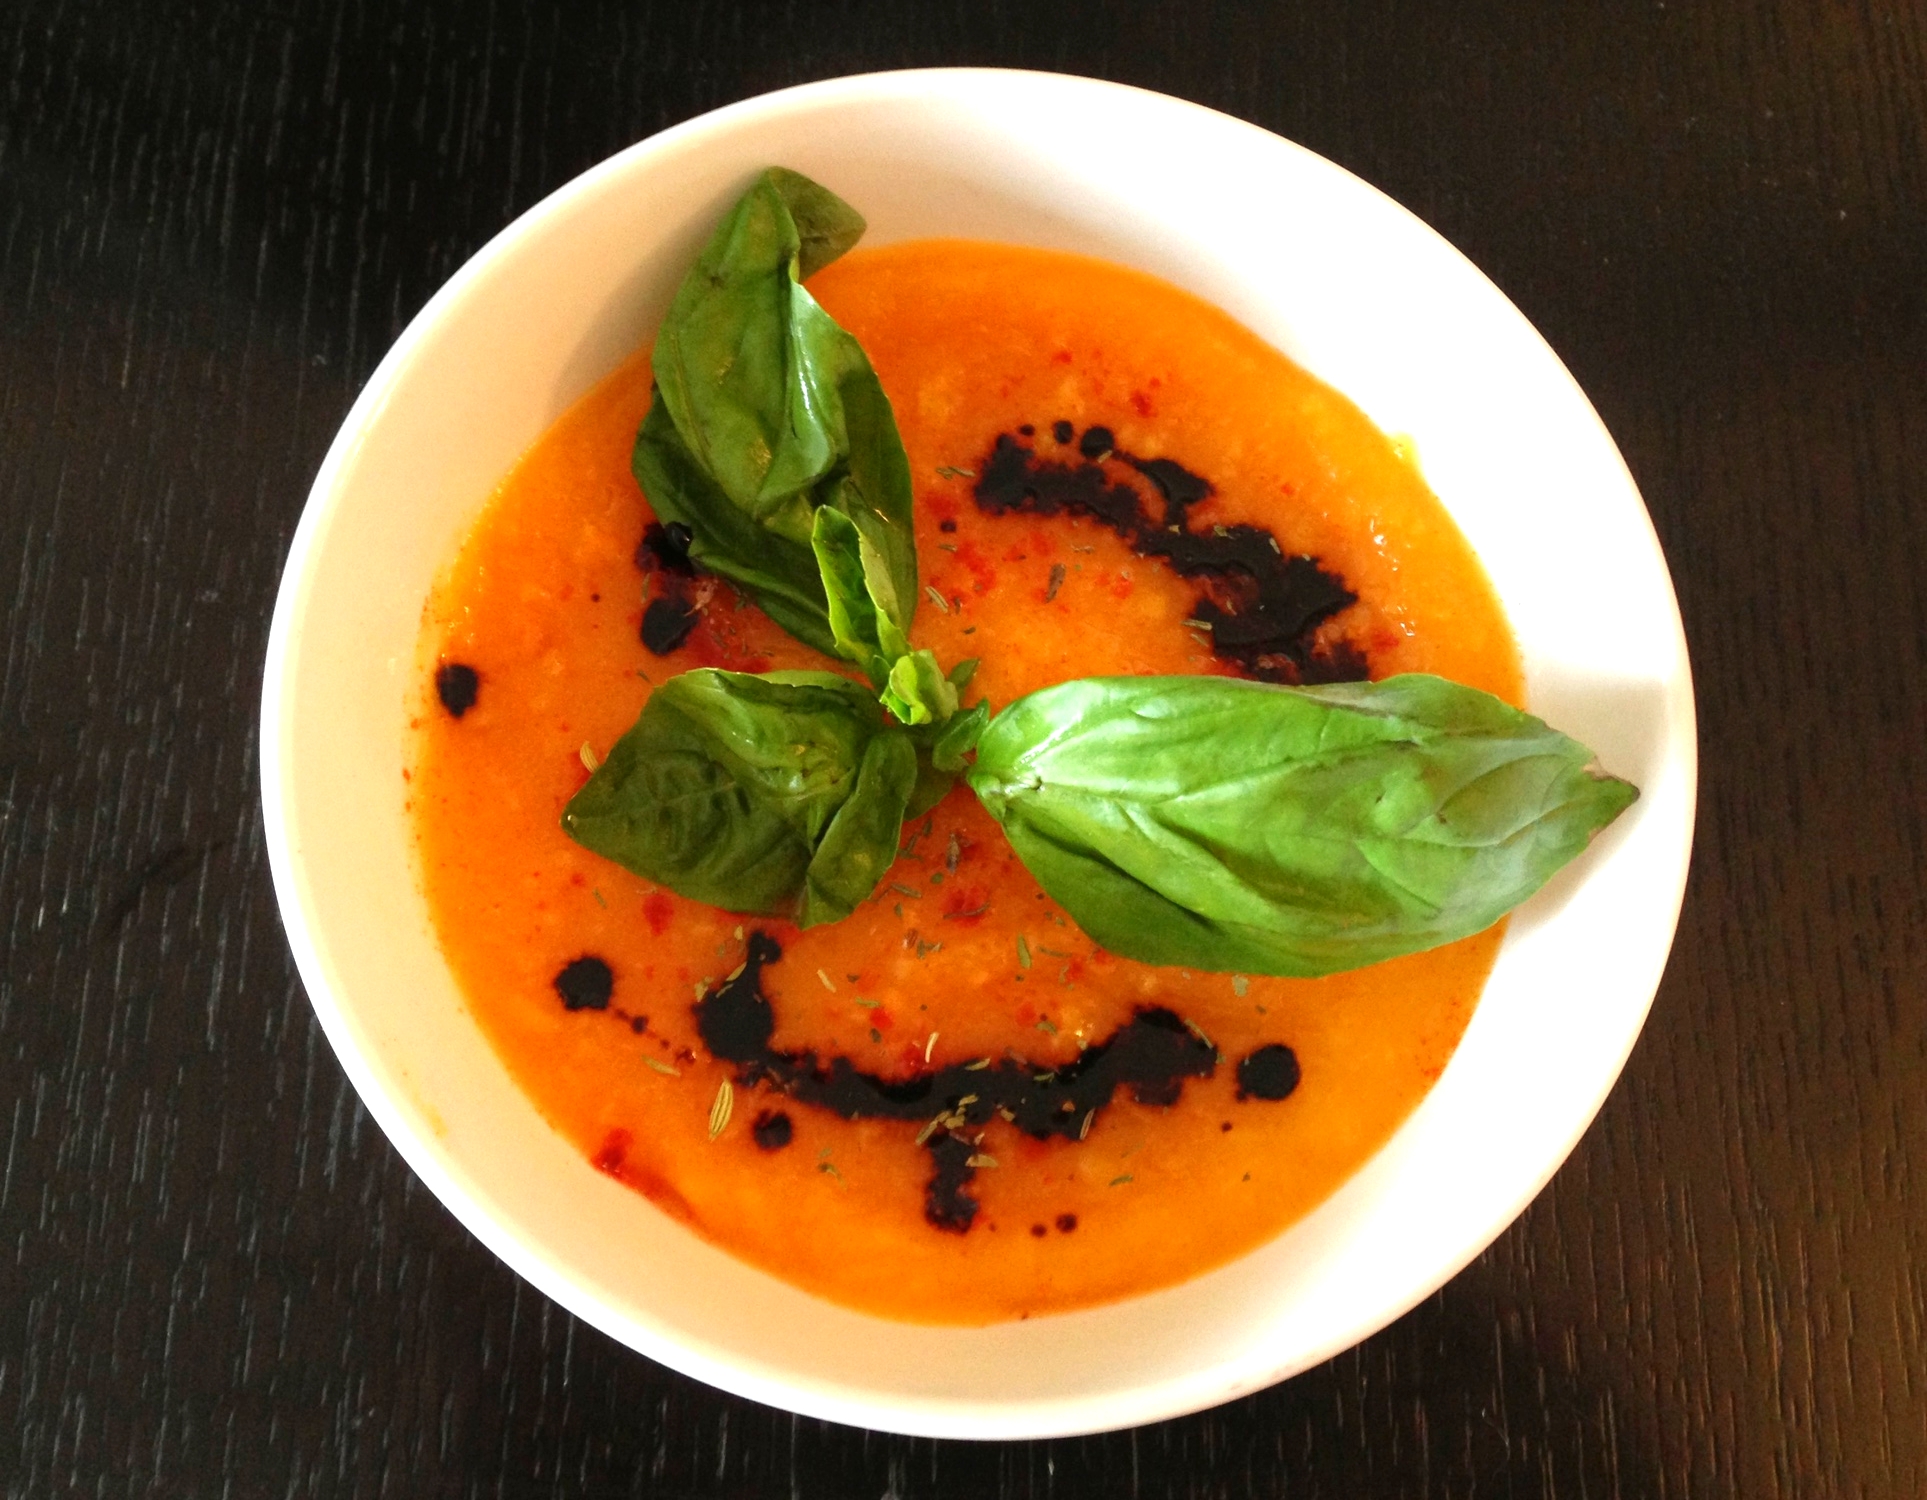 Pumpkin soup with smoked paprika, aged balsamic, and basil